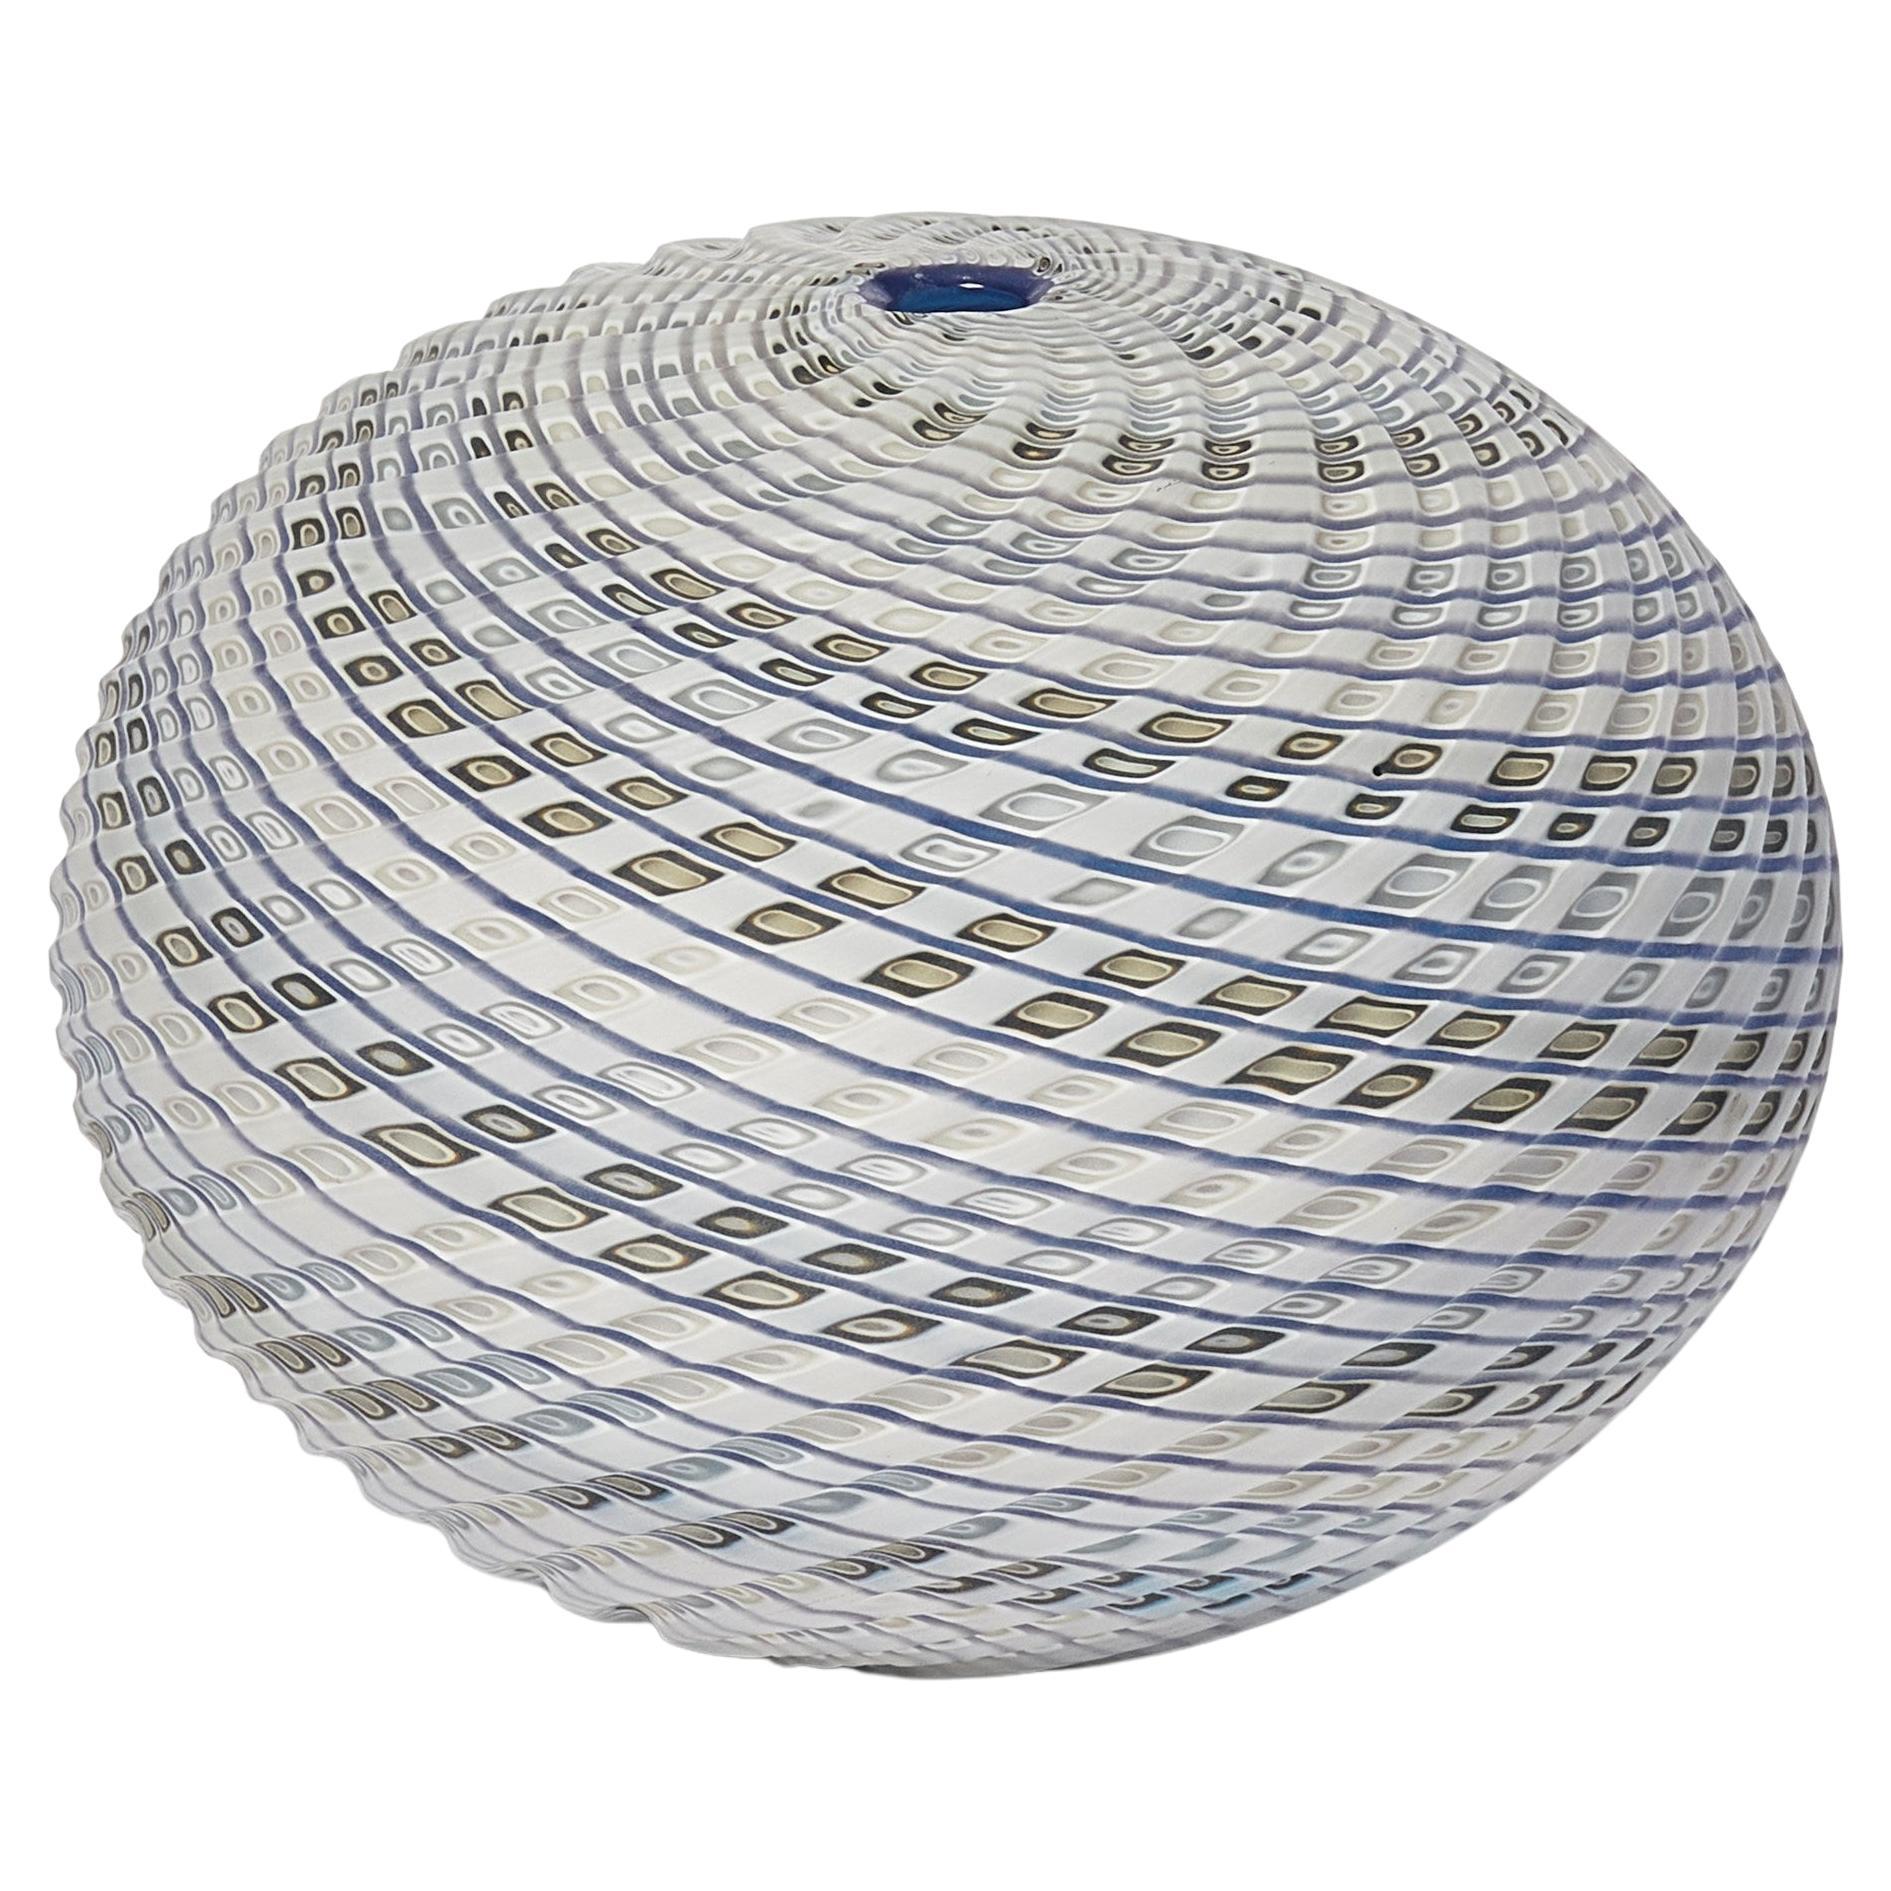 Woven Three Tone Blue Round, textured glass sculptural object by Layne Rowe